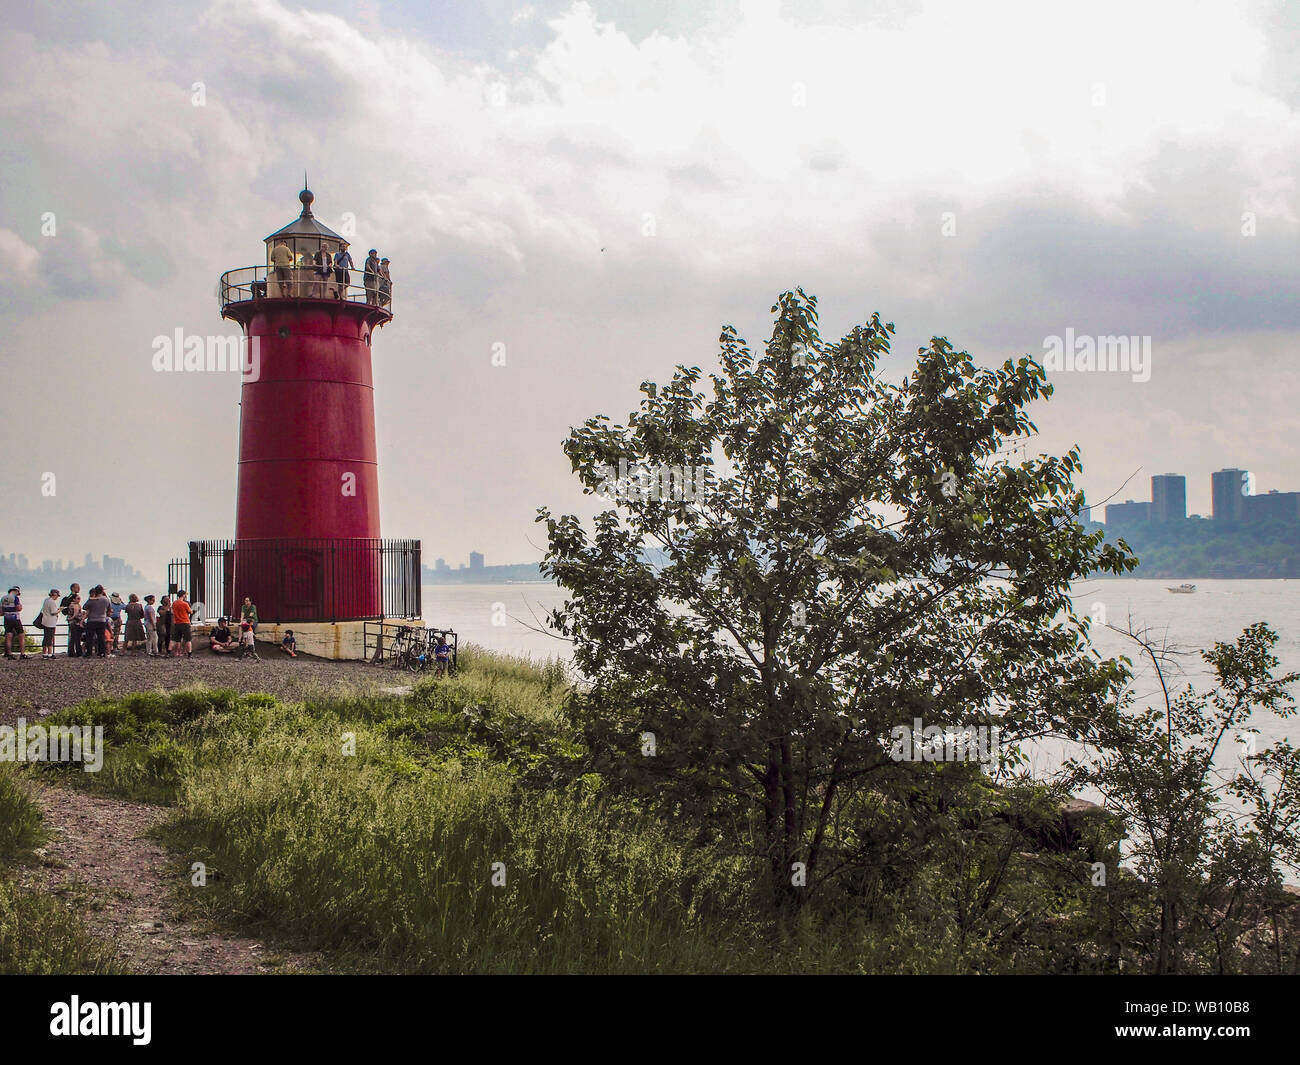 New York - United States, June 4, 2016 - People visiting The Little Red Lighthouse Stock Photo